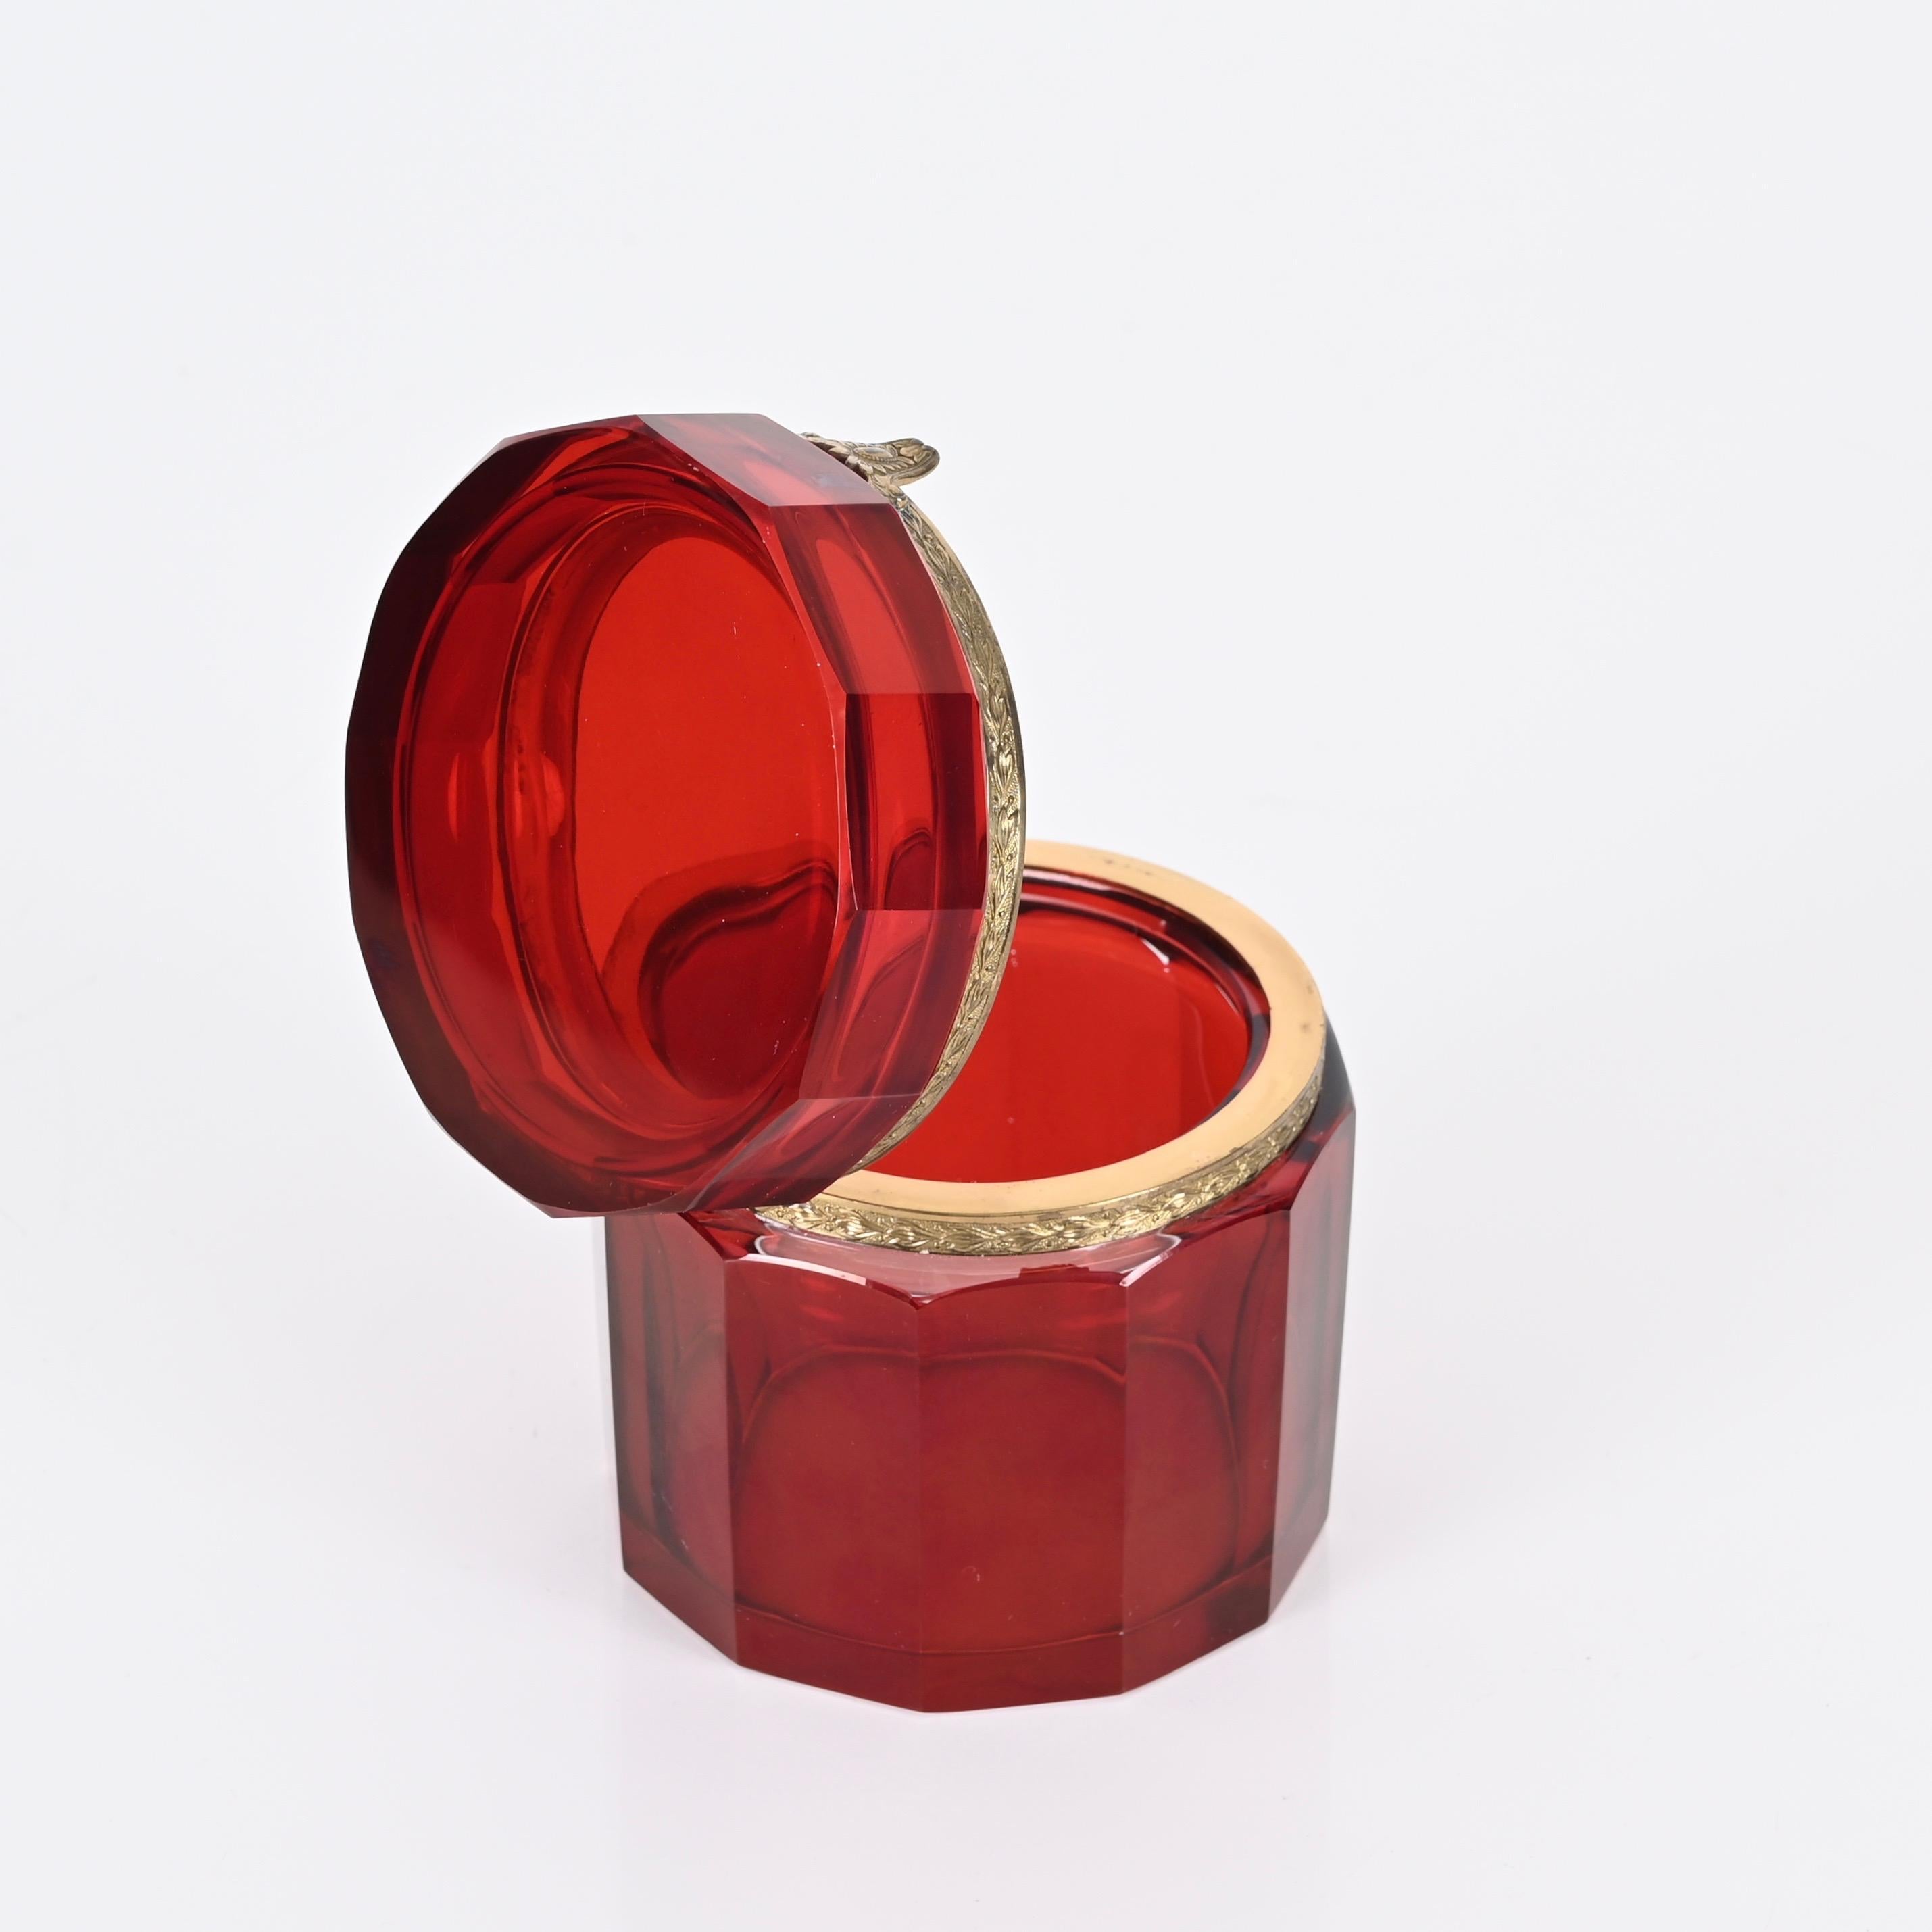 Ruby Red and Gilt Silver Faceted Murano Glass Jewelry Box, Italy 1920s For Sale 3